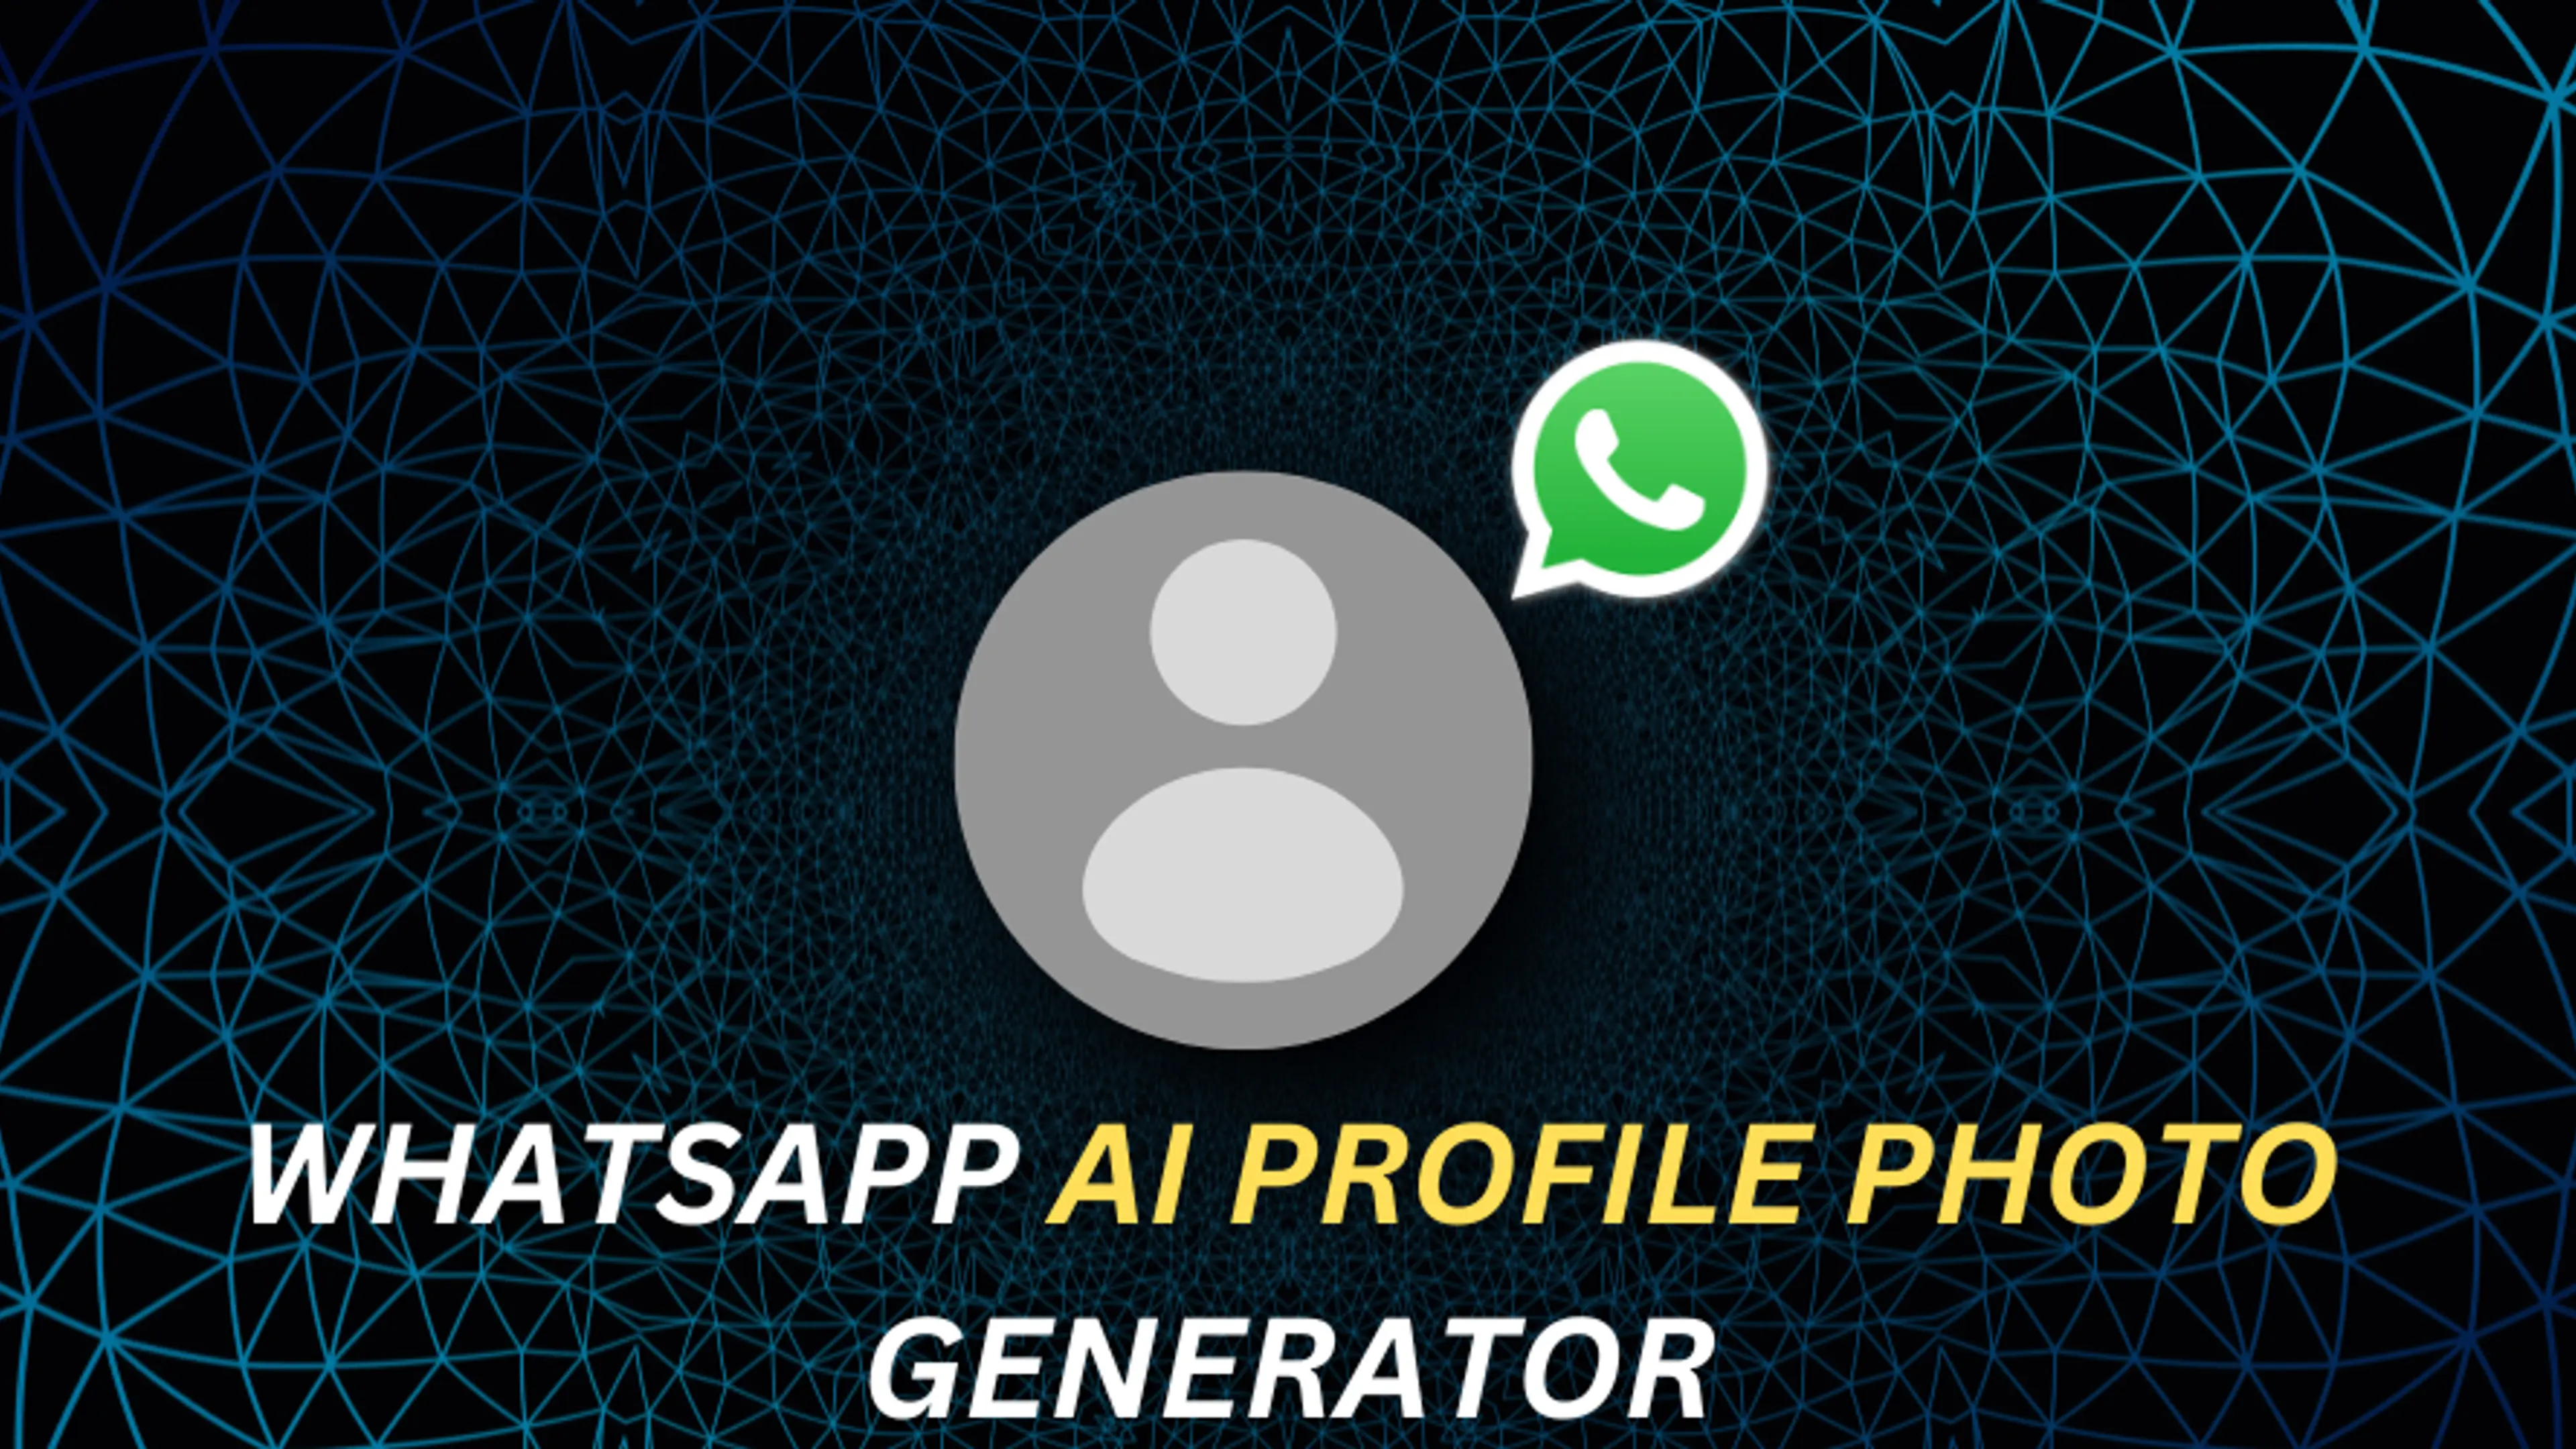 WhatsApp's New AI Feature Creates Stunning Profile Photos Instantly!